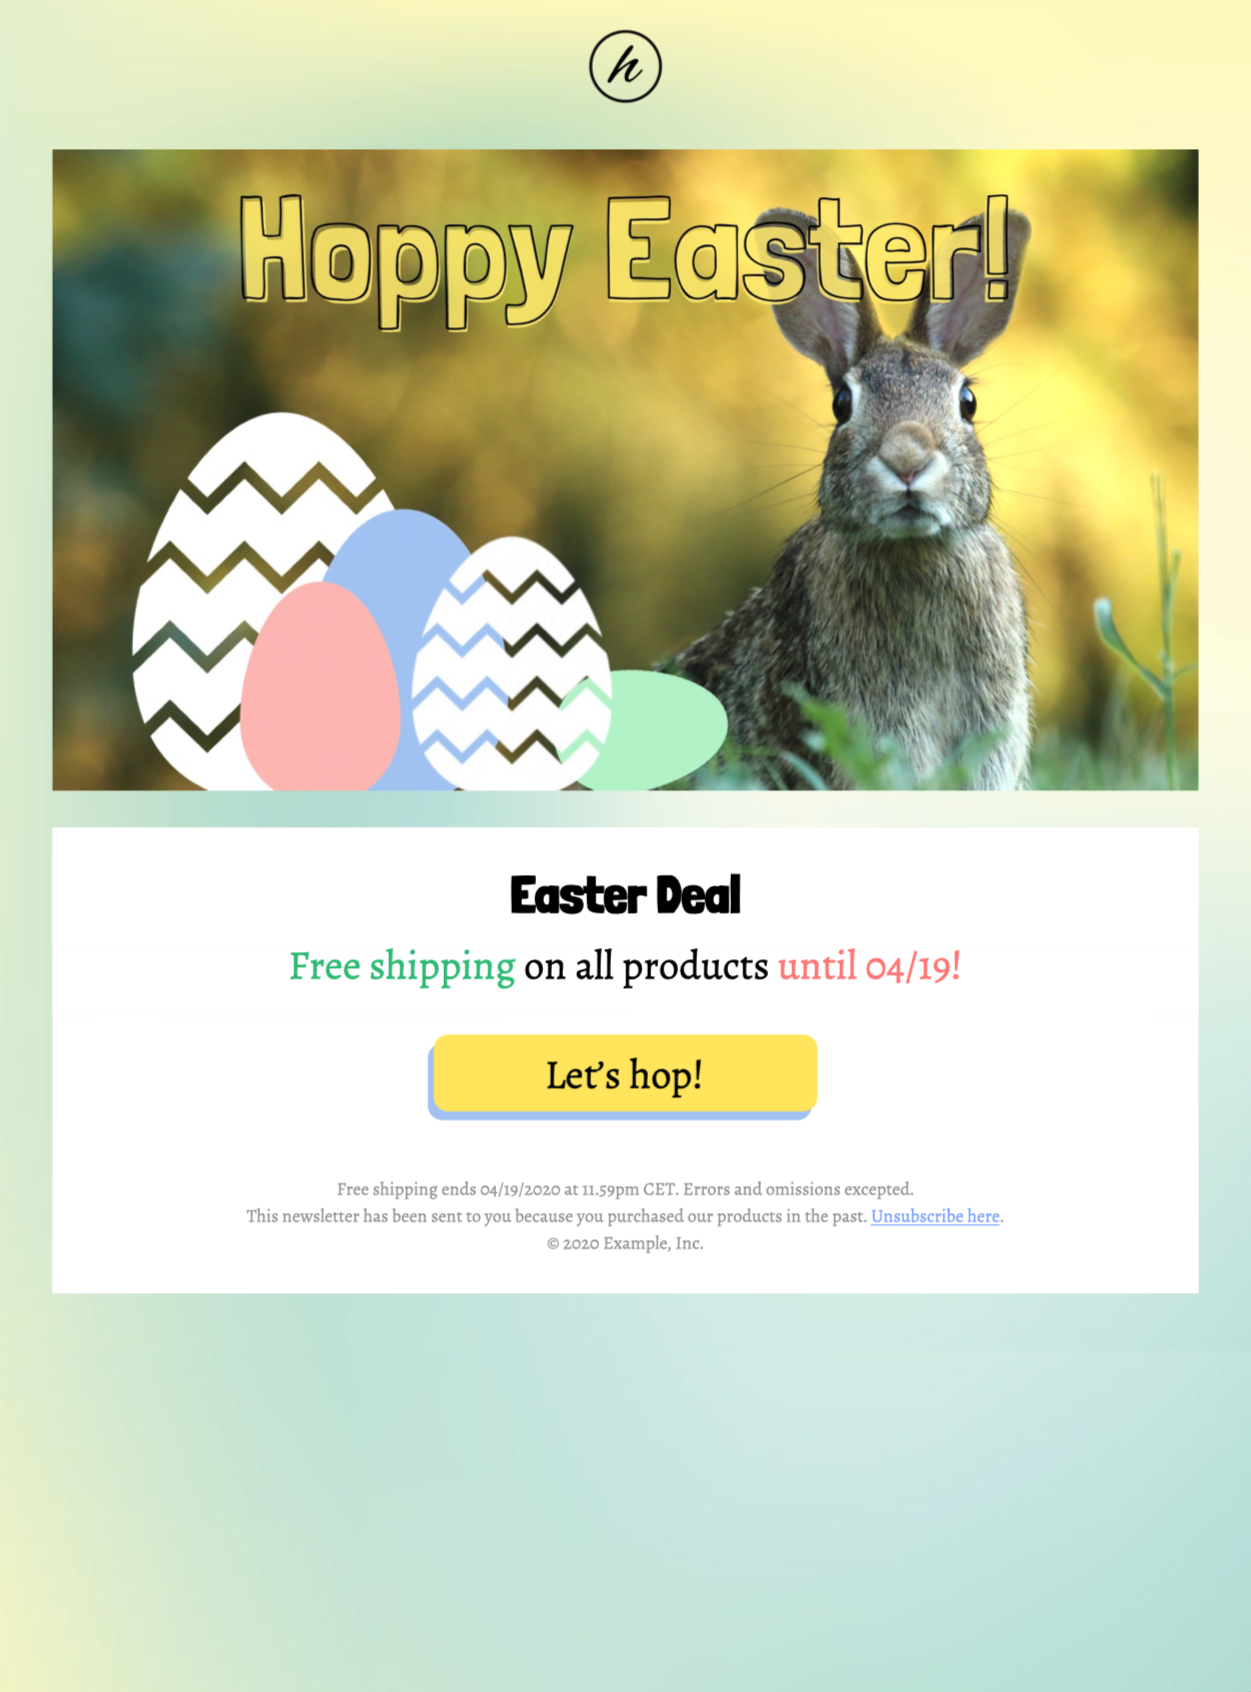 html email template for easter email promotion